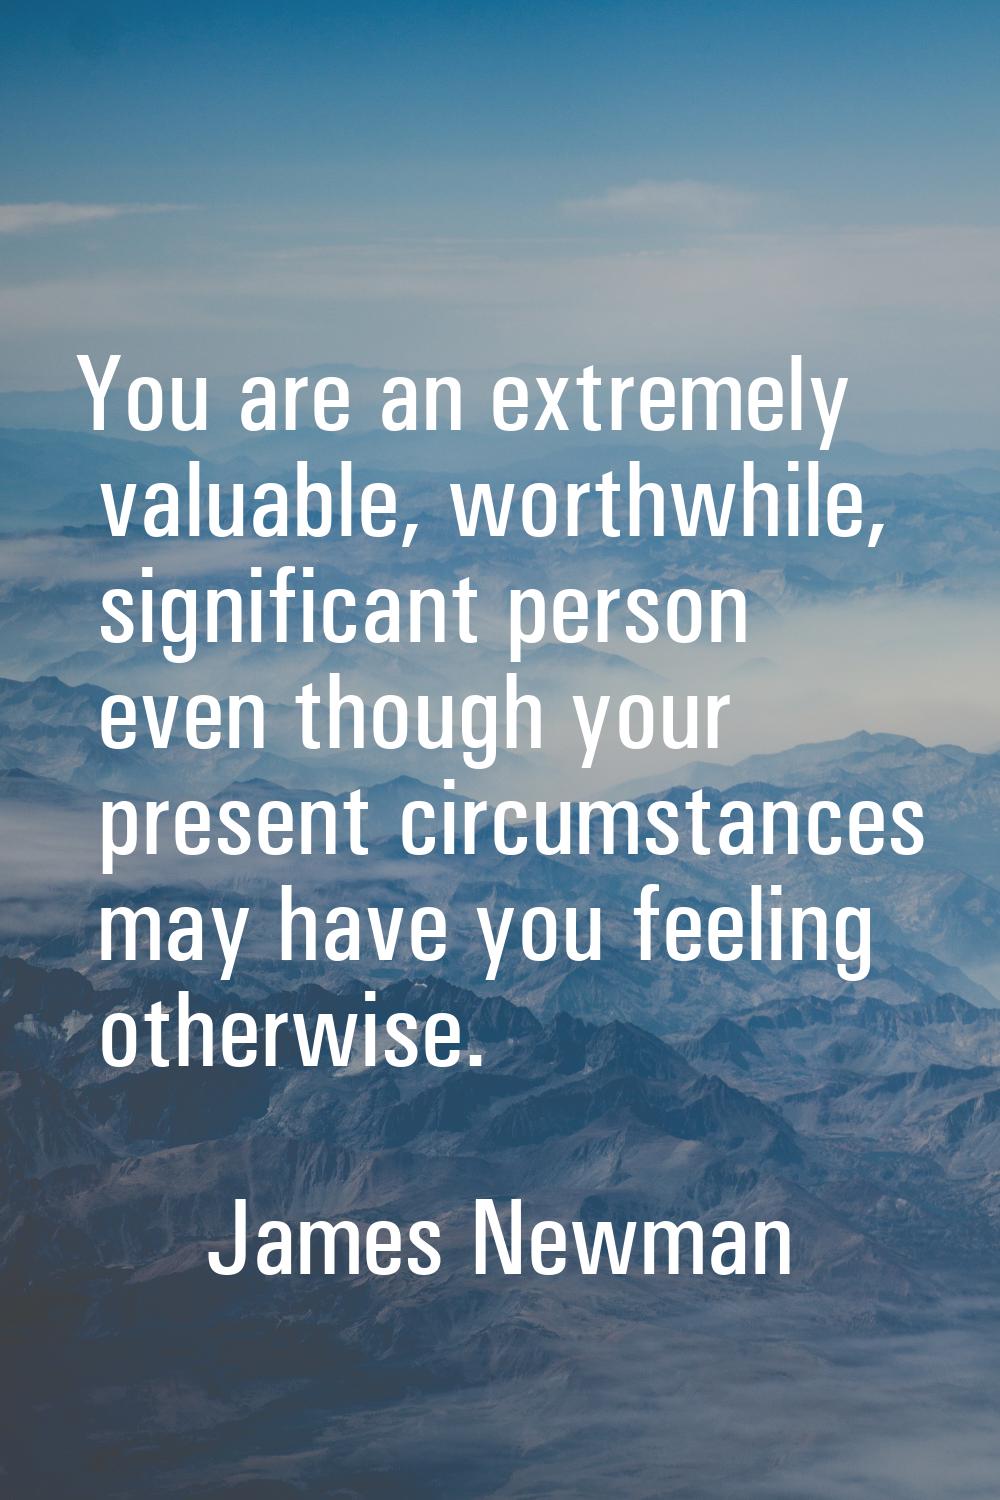 You are an extremely valuable, worthwhile, significant person even though your present circumstance